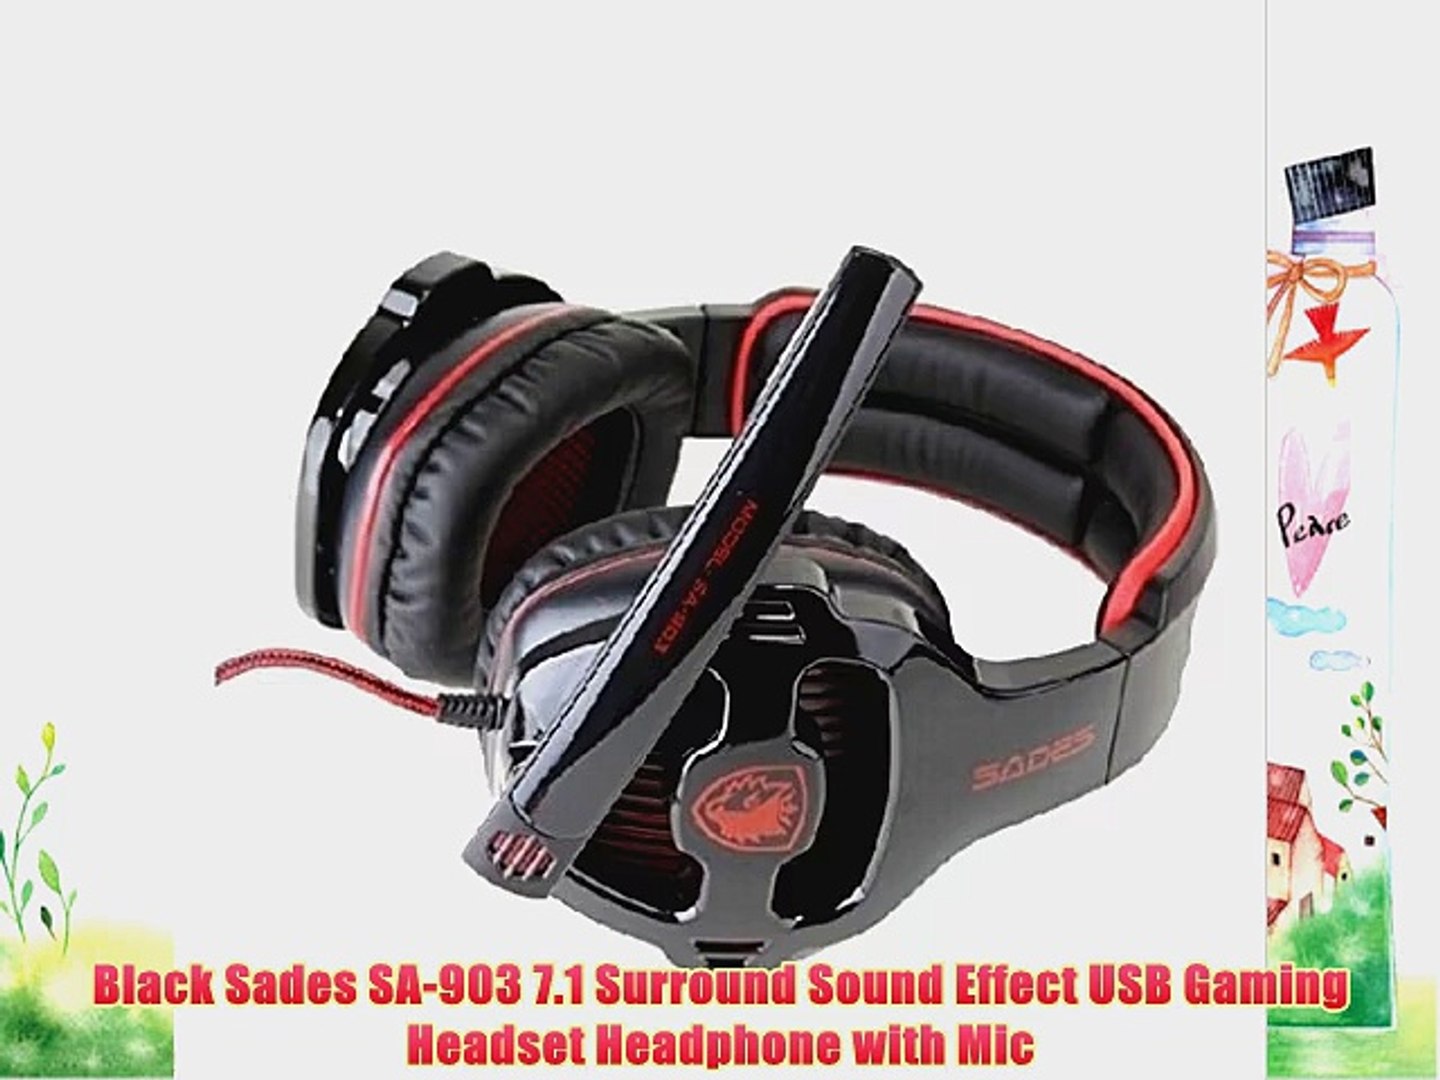 Black Sades Sa 903 7 1 Surround Sound Effect Usb Gaming Headset Headphone With Mic Video Dailymotion